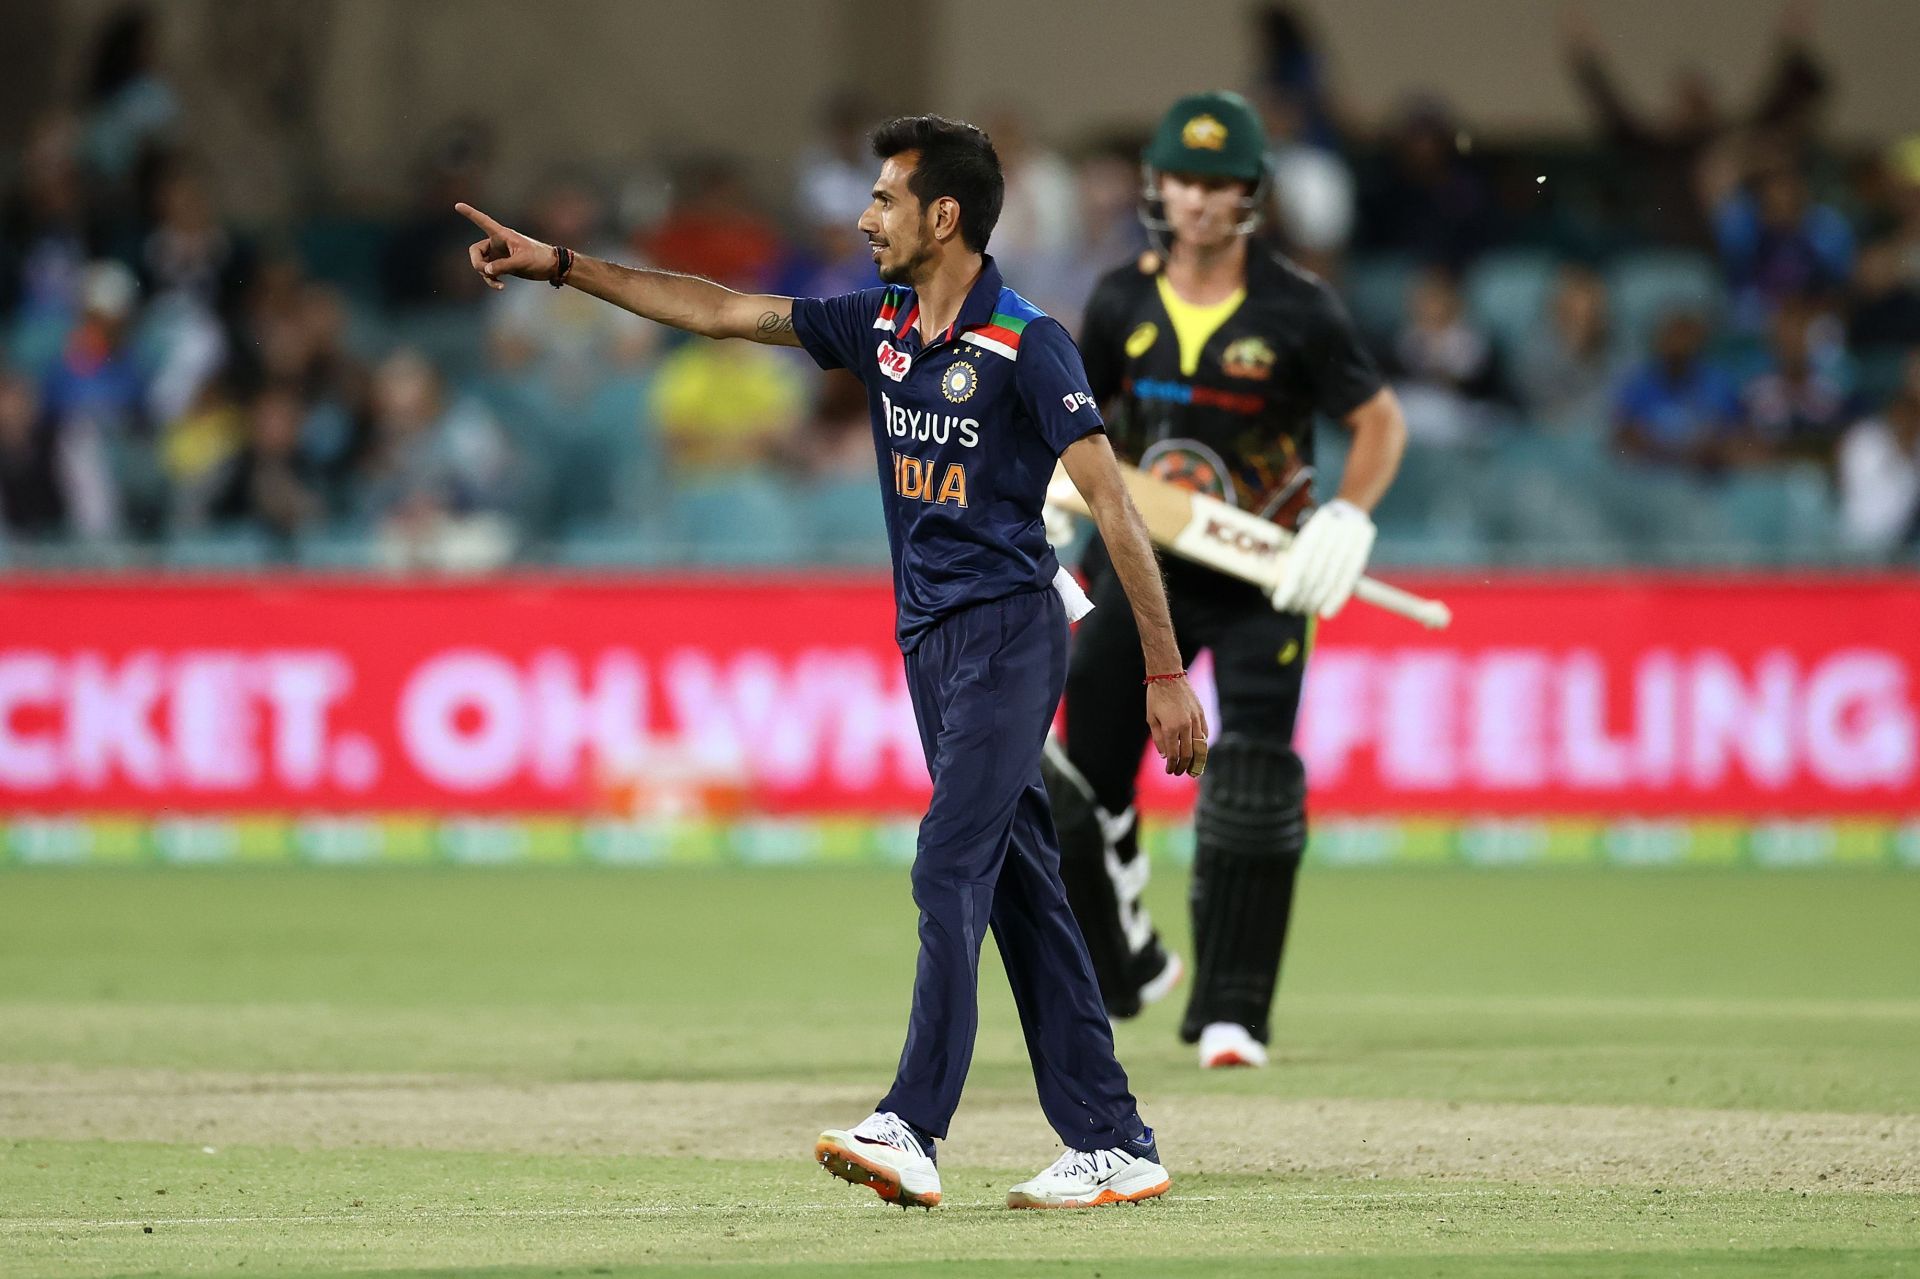 Team India leggie Yuzvendra Chahal celebrates after taking the wicket of Aaron Finch in the 2020 Canberra T20I. Pic: Getty Images